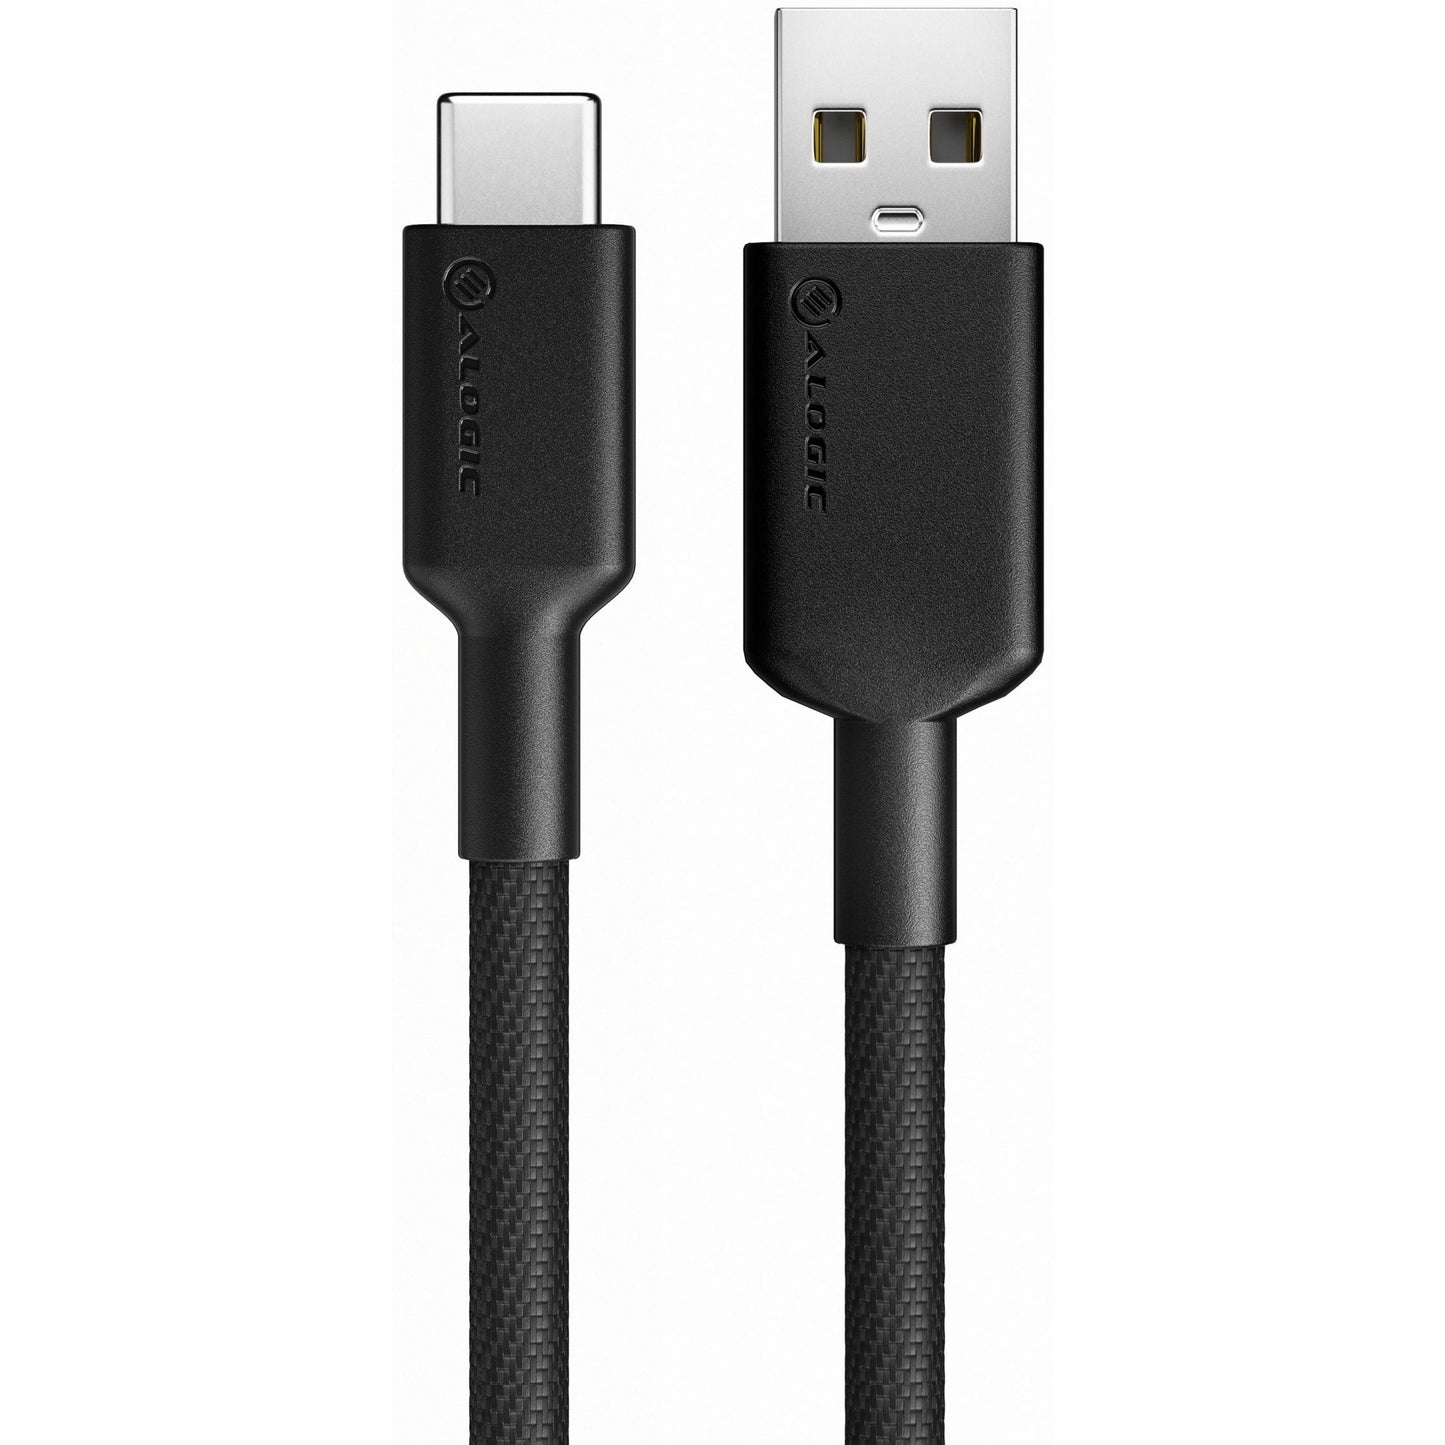 ALOGIC Elements PRO USB-C to USB-A Cable - Male to Male - 1m - USB 2.0 - 3A - 480Mbps - Black